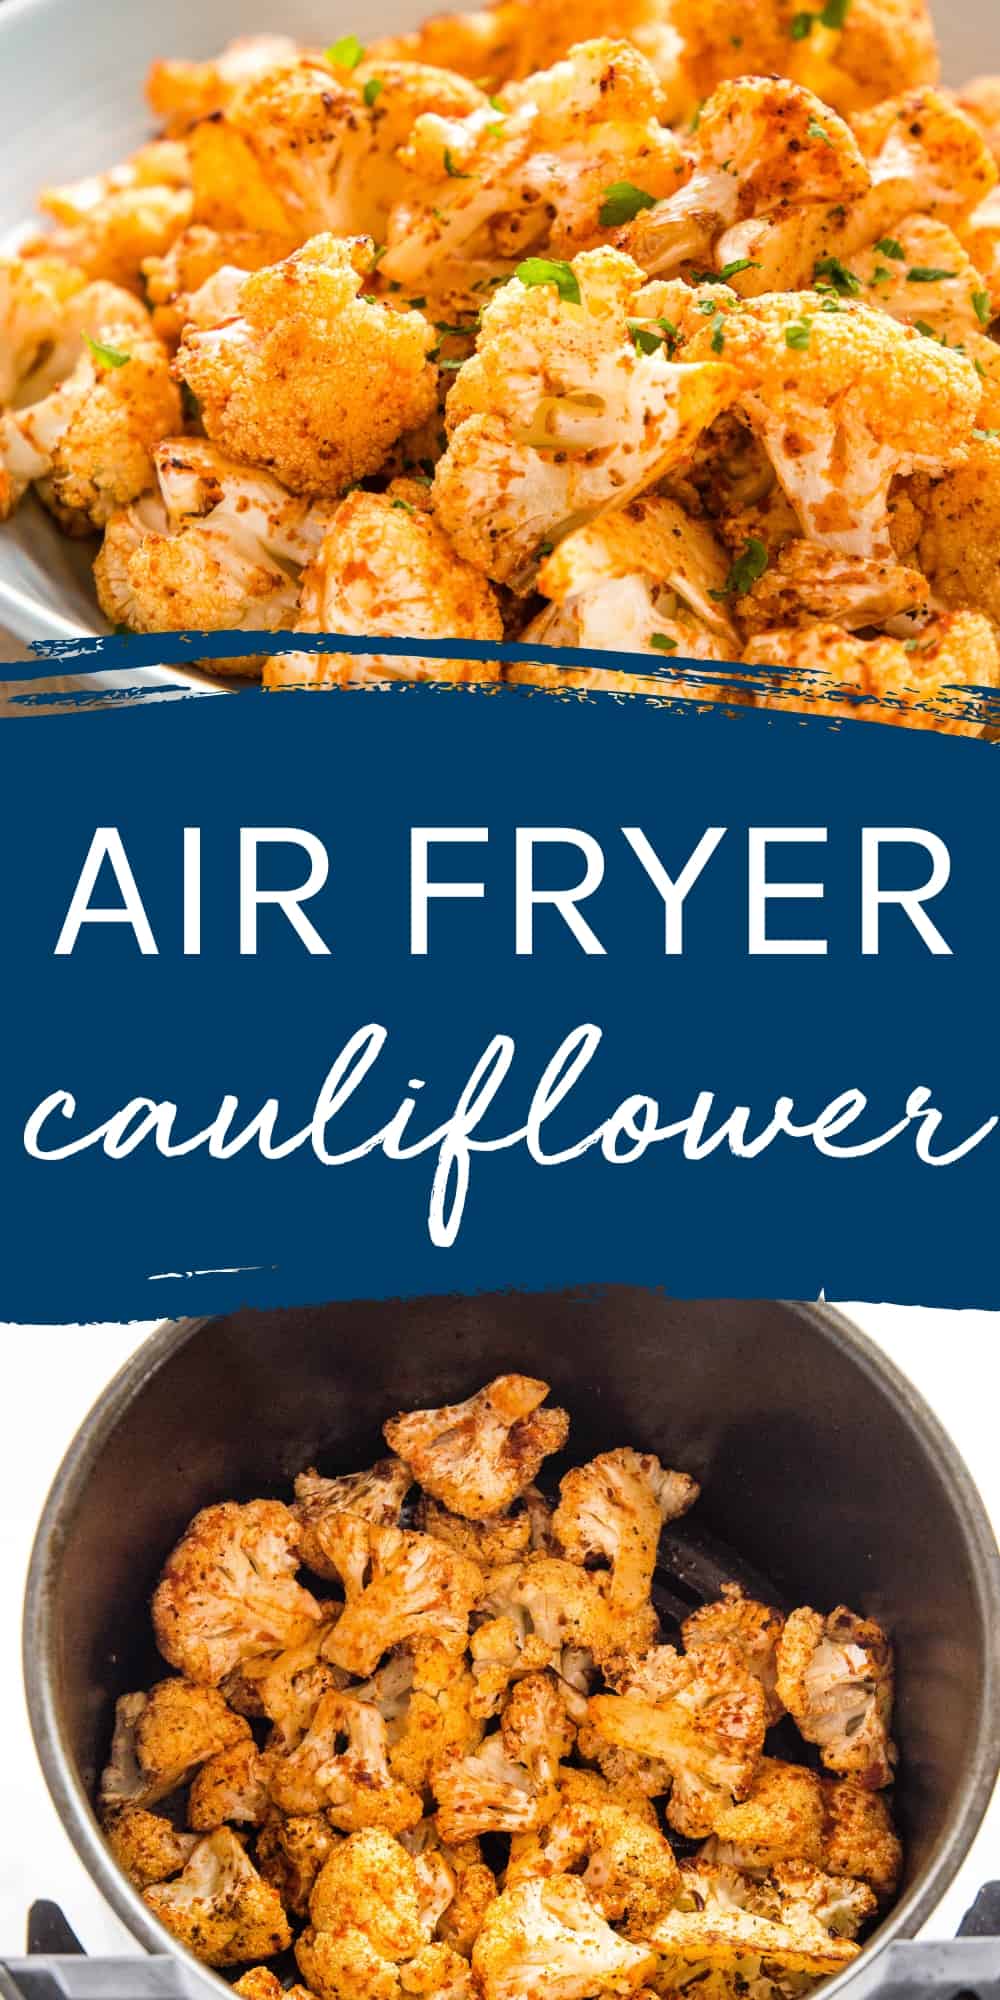 This Air Fryer Cauliflower is perfectly tender and full of flavour. An easy and healthy side dish that's ready in 15 minutes - make it with fresh or frozen cauliflower! Recipe from thebusybaker.ca! #airfryercauliflower #airfryersidedish #sidedish #cauliflower #lowcarb #healthy #healthysidedish via @busybakerblog